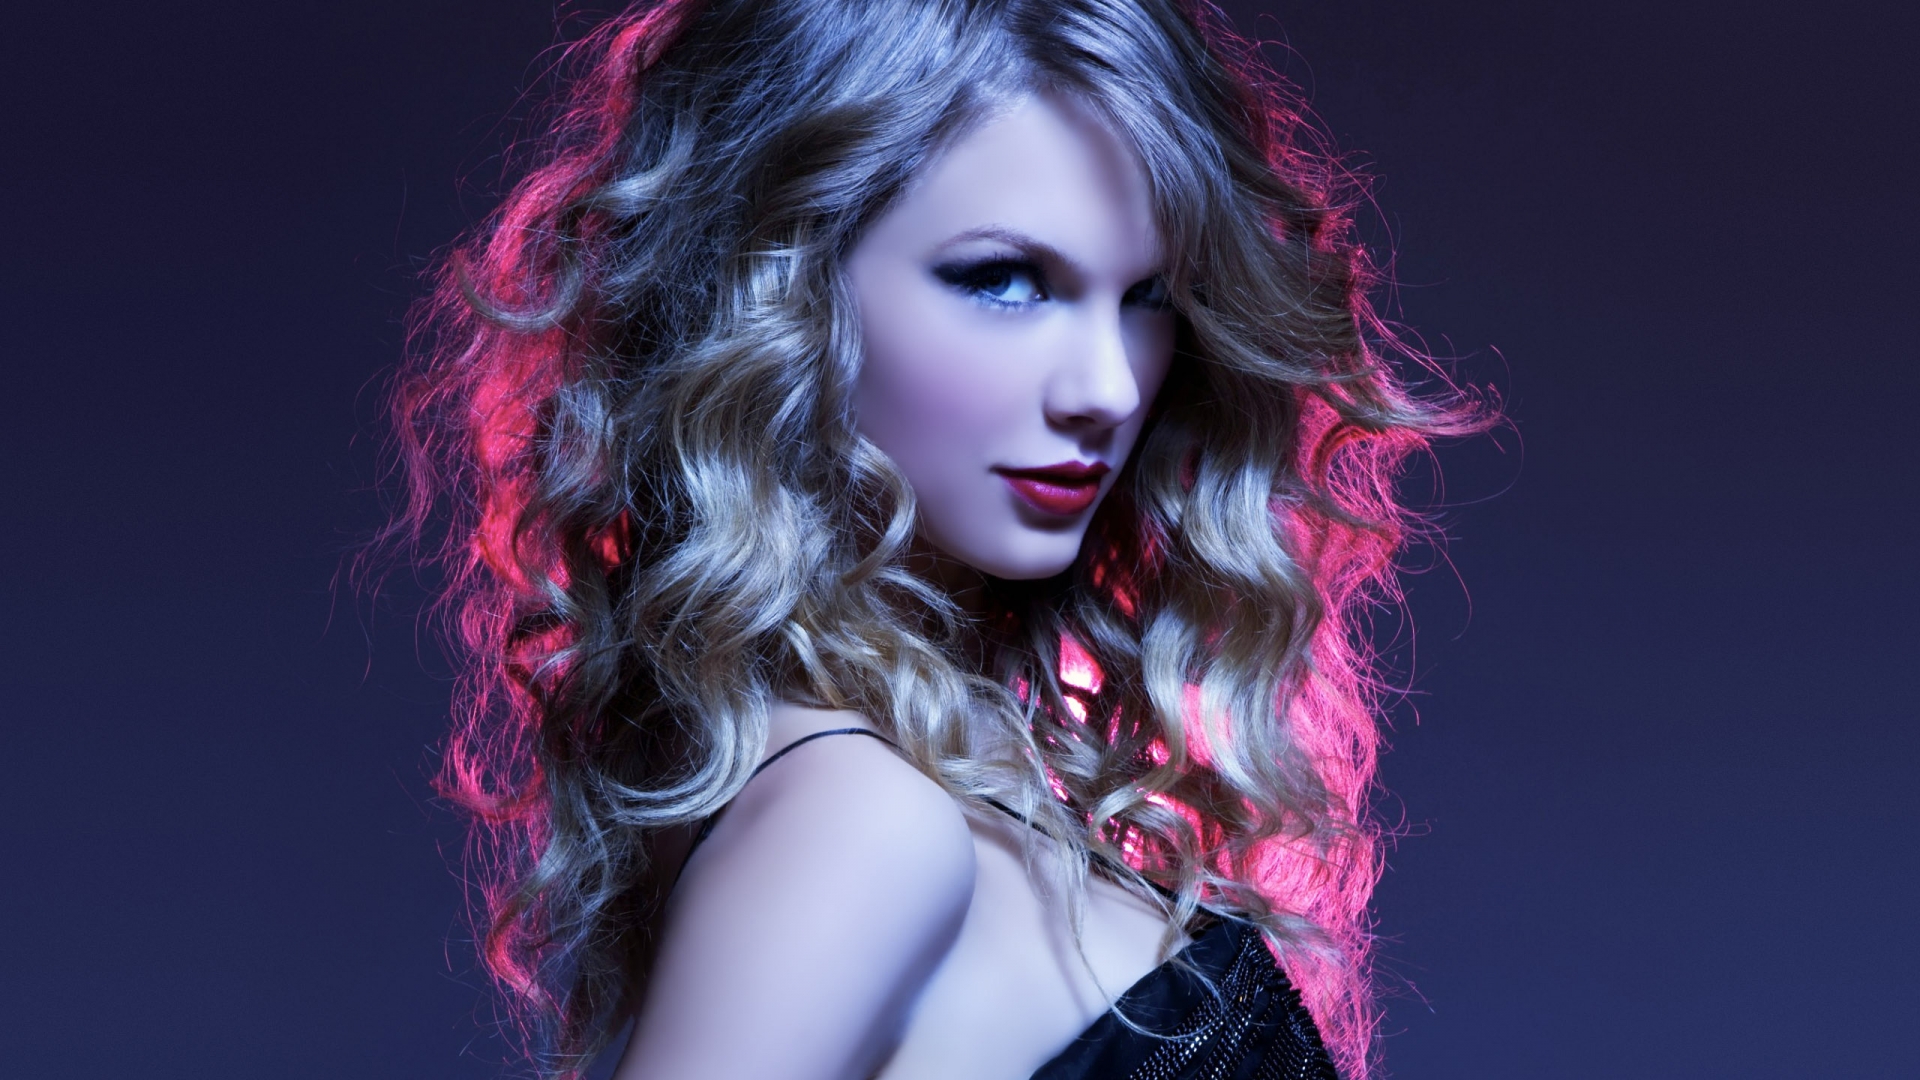 The Amazing Taylor Swift for 1920 x 1080 HDTV 1080p resolution